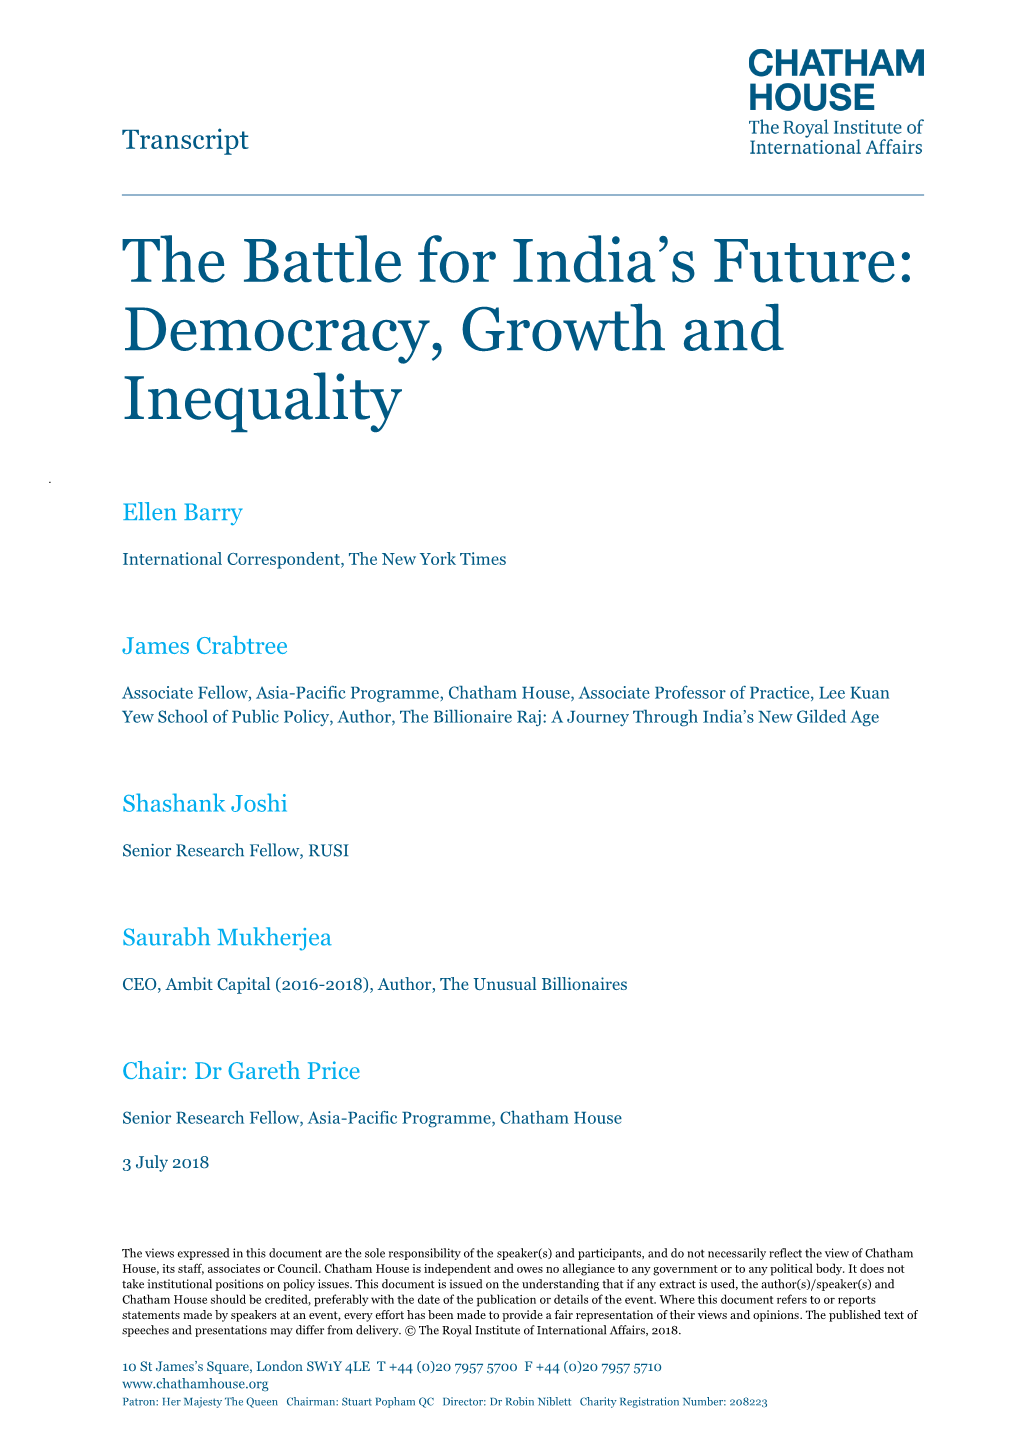 The Battle for India's Future: Democracy, Growth And